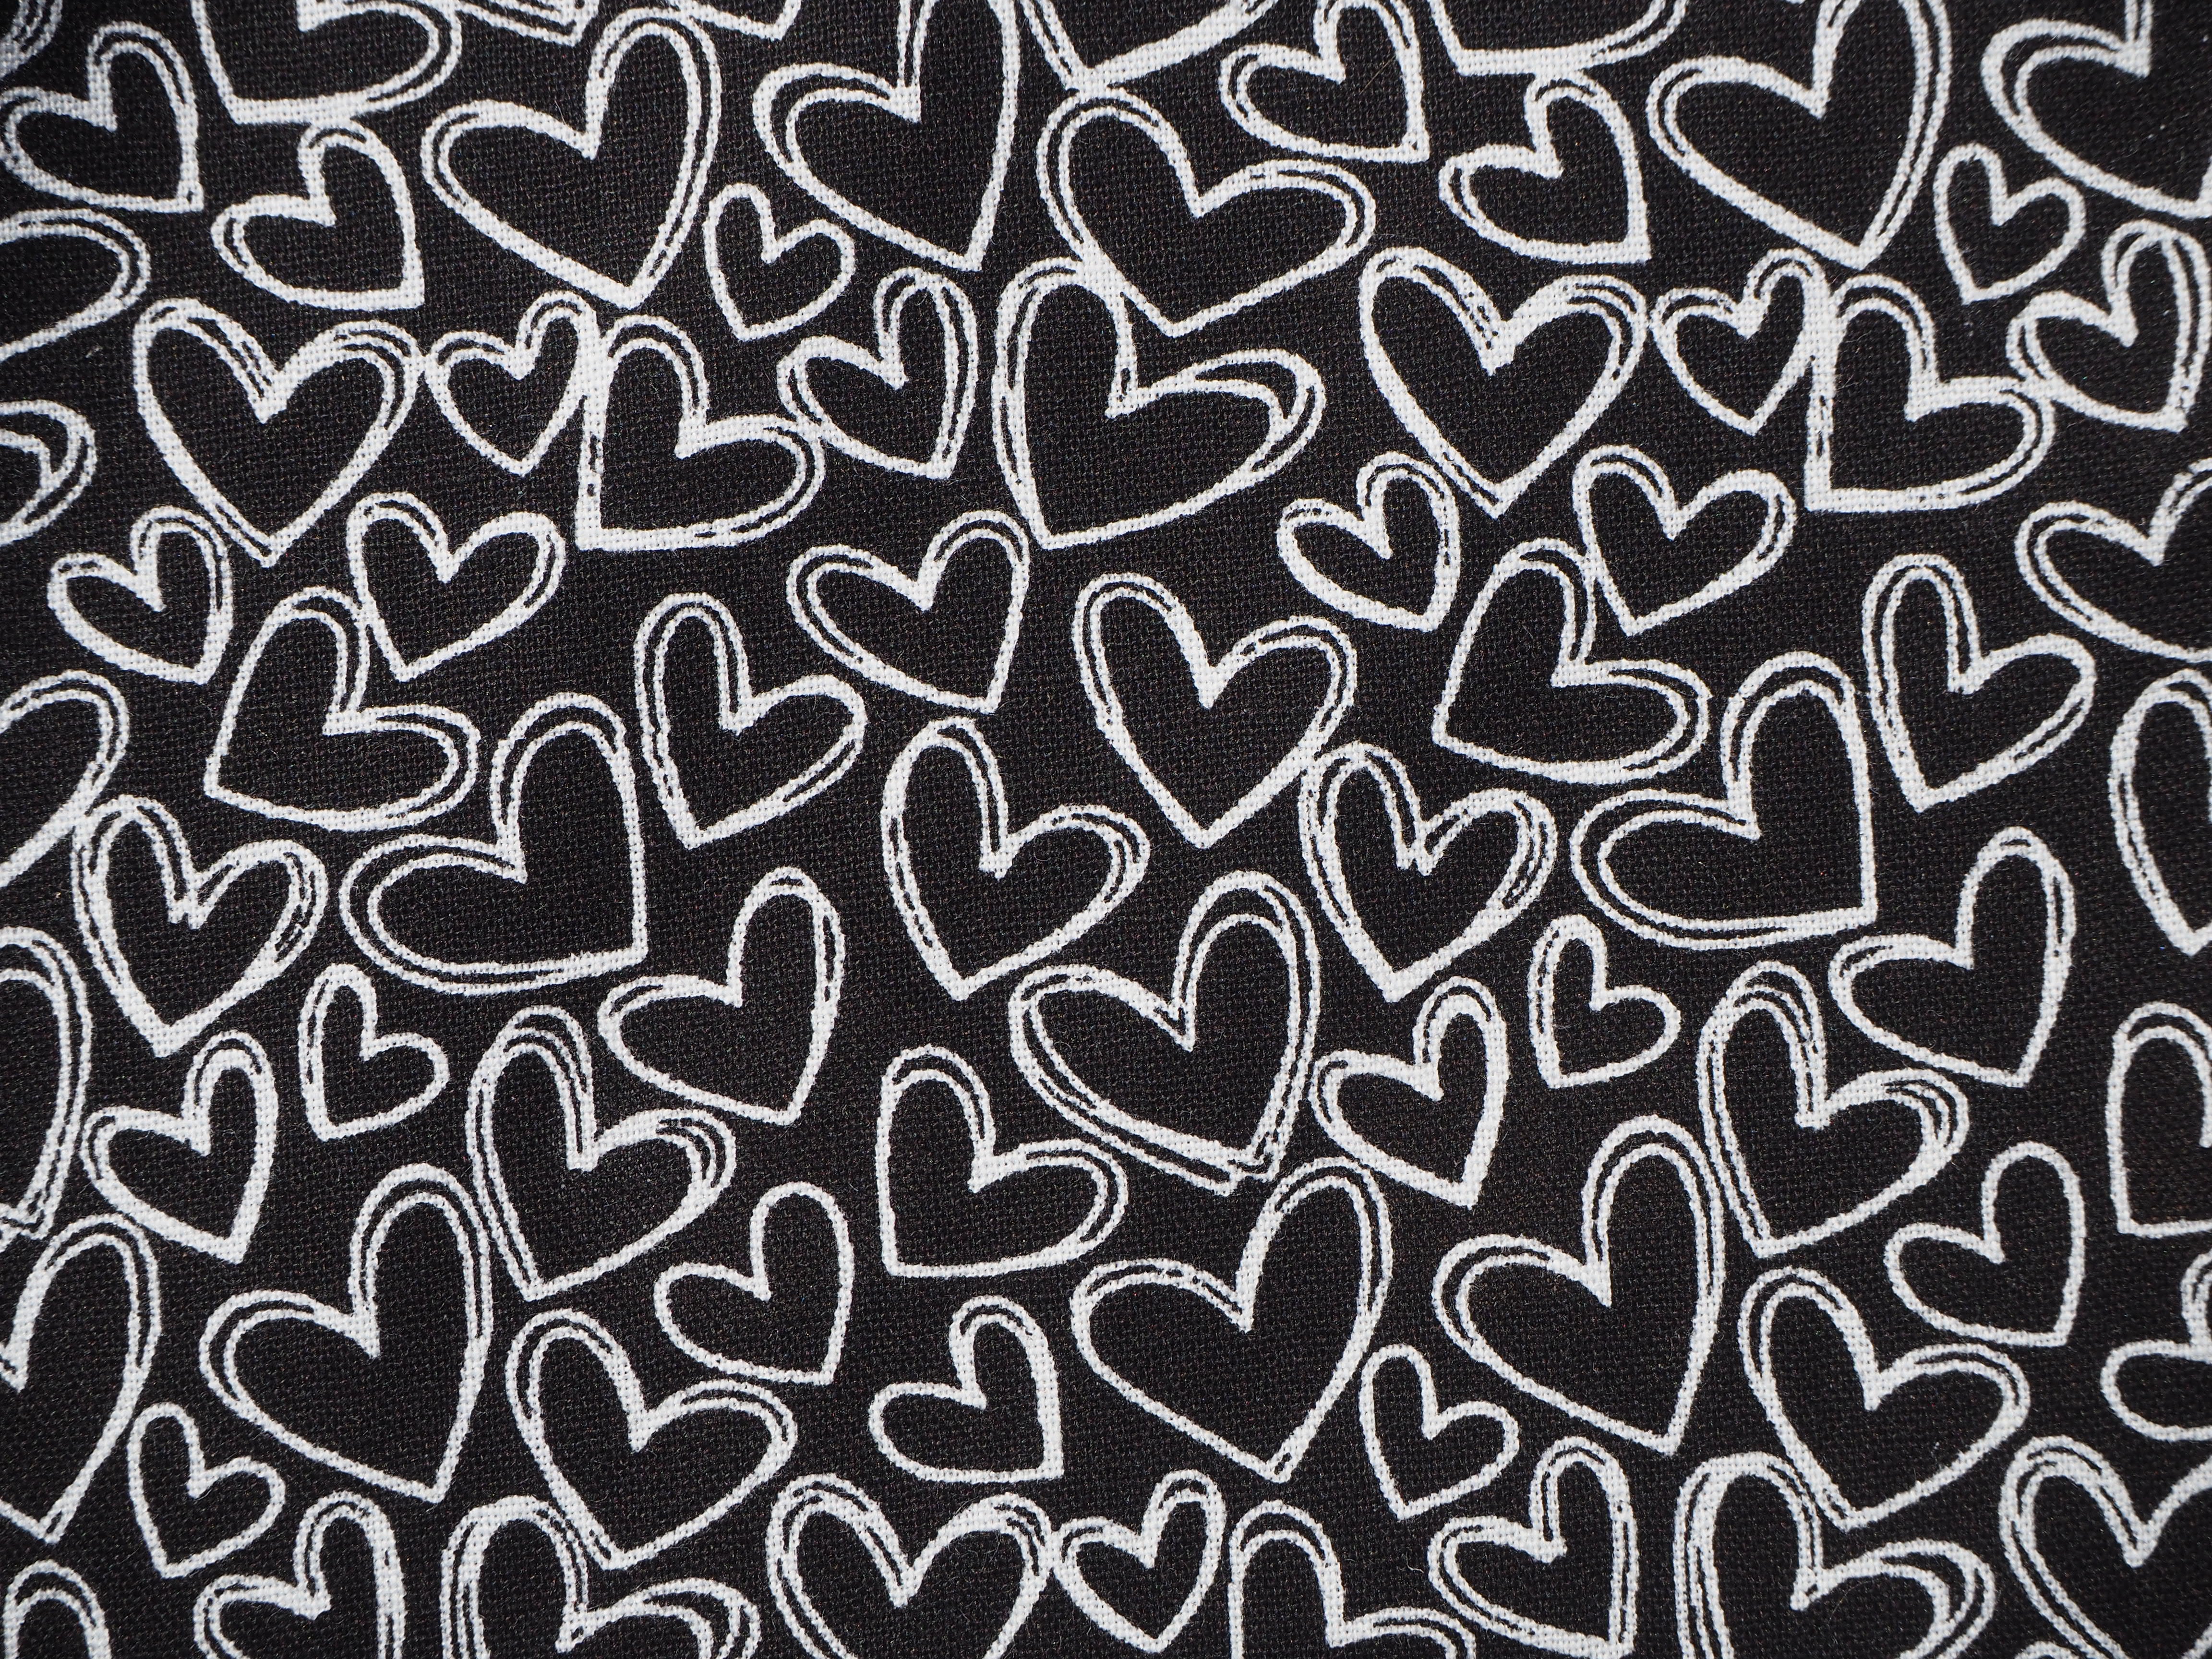 Fabric view of A Sack Of Wheat, featuring black & white hearts on black background,100% cotton fabric